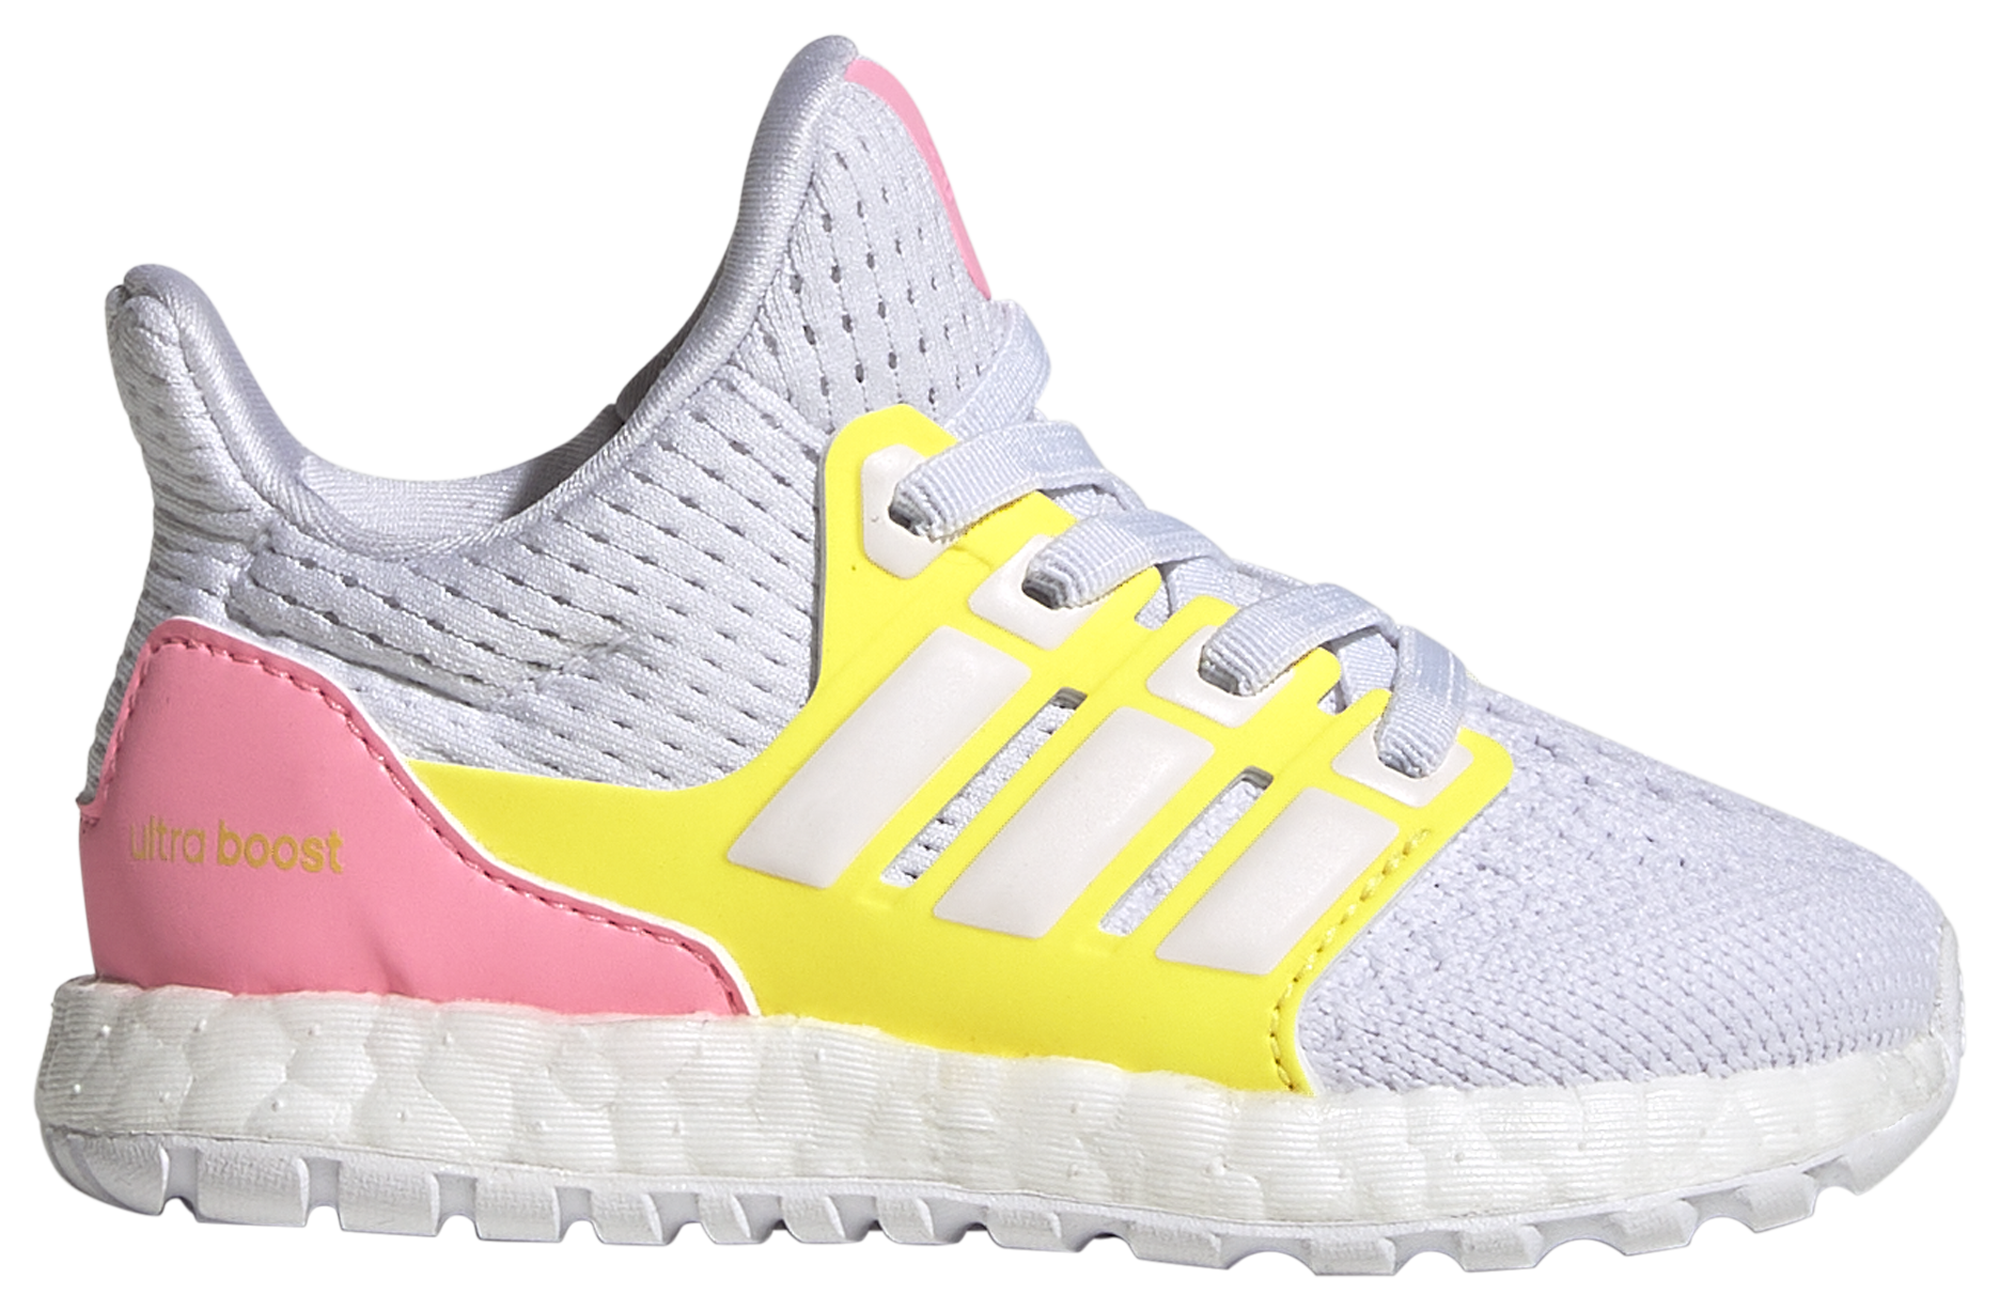 adidas ultraboost 5.0 dna casual running sneakers